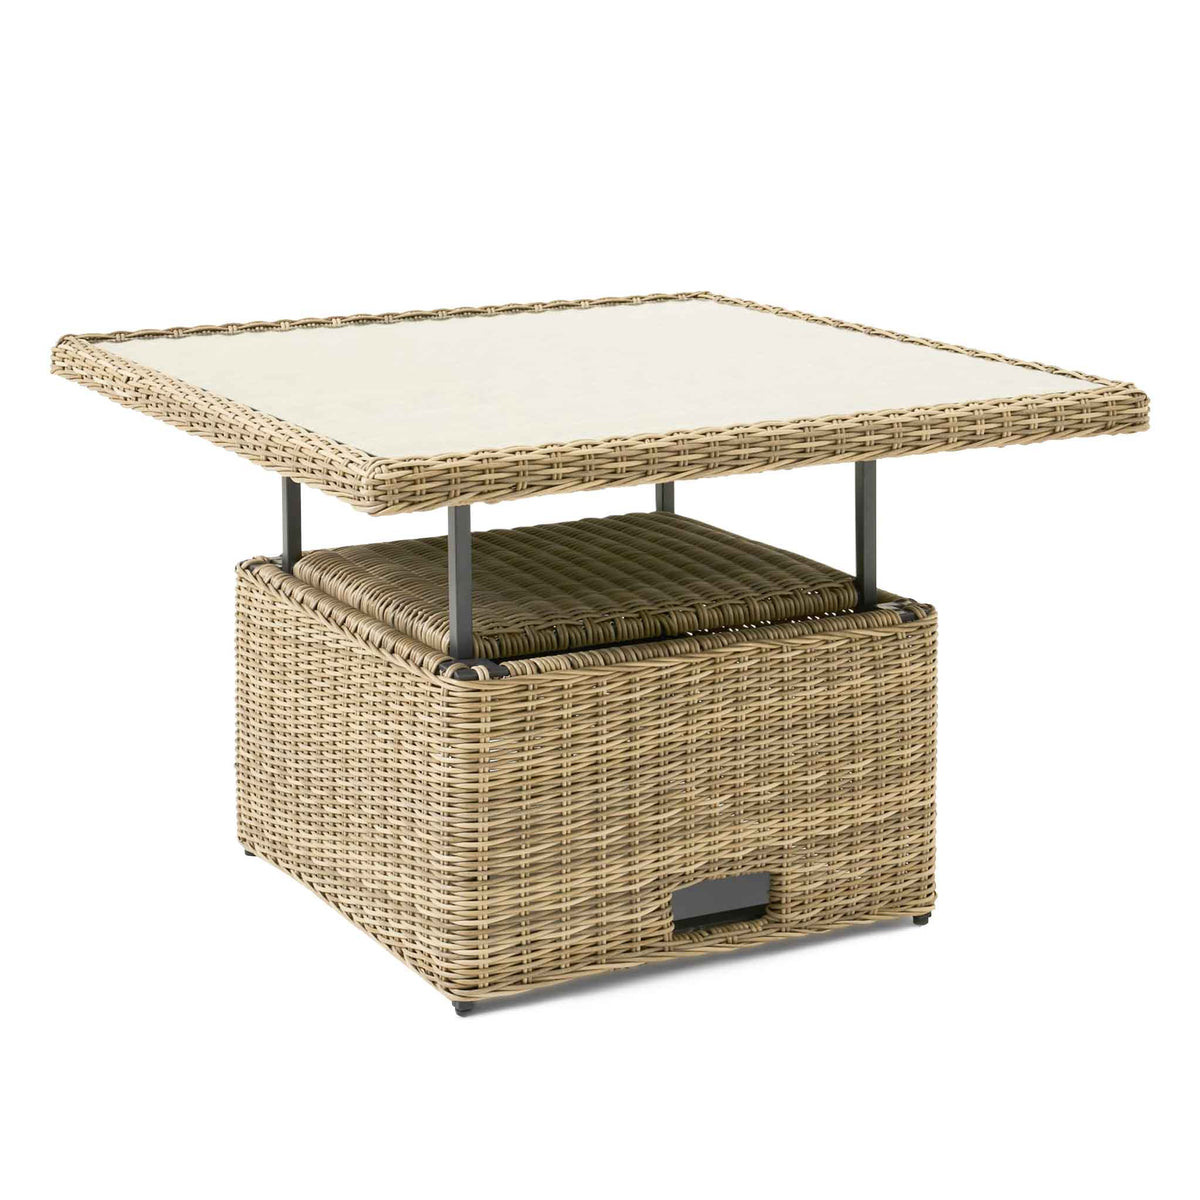 Wentworth Rattan Garden Lounge Dining Set with Adjustable Coffee Table 